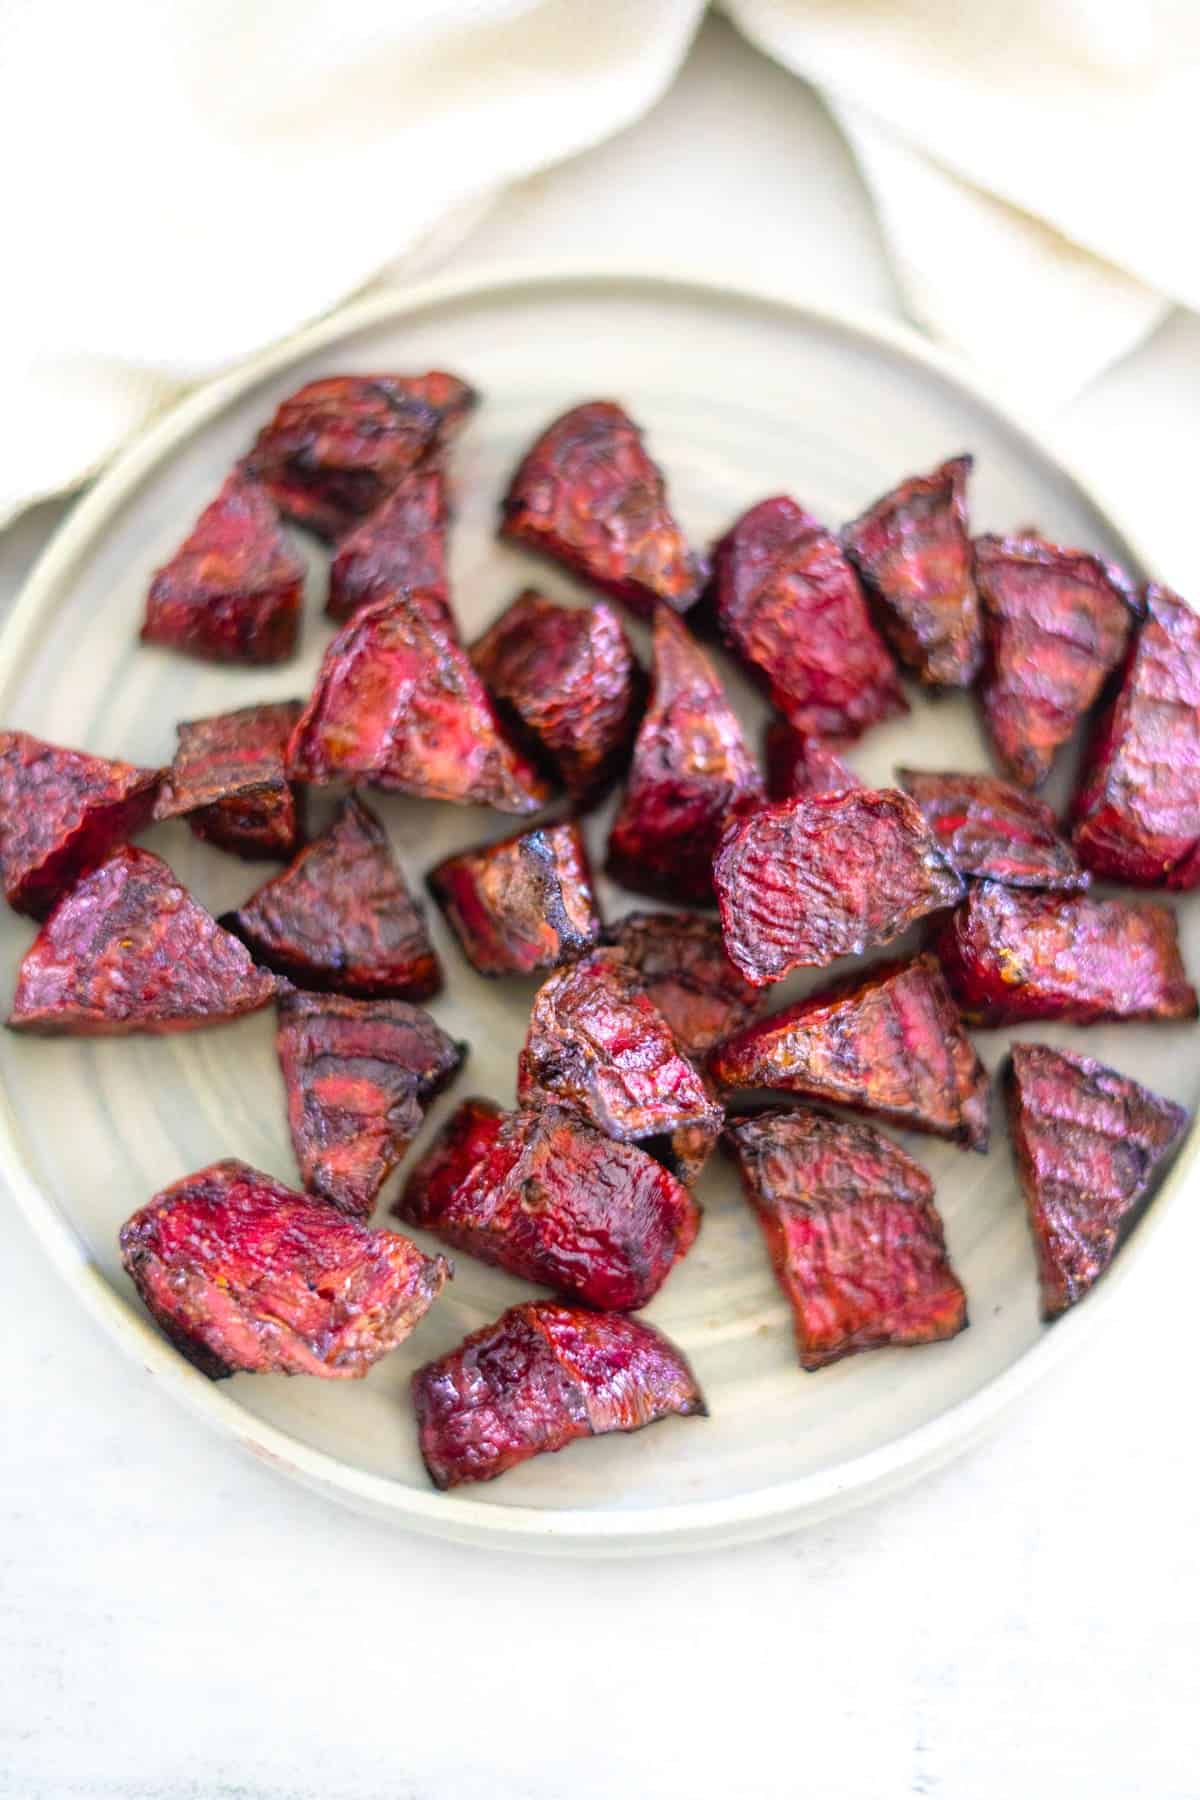 Air fryer roasted beets on a plate with a napkin.